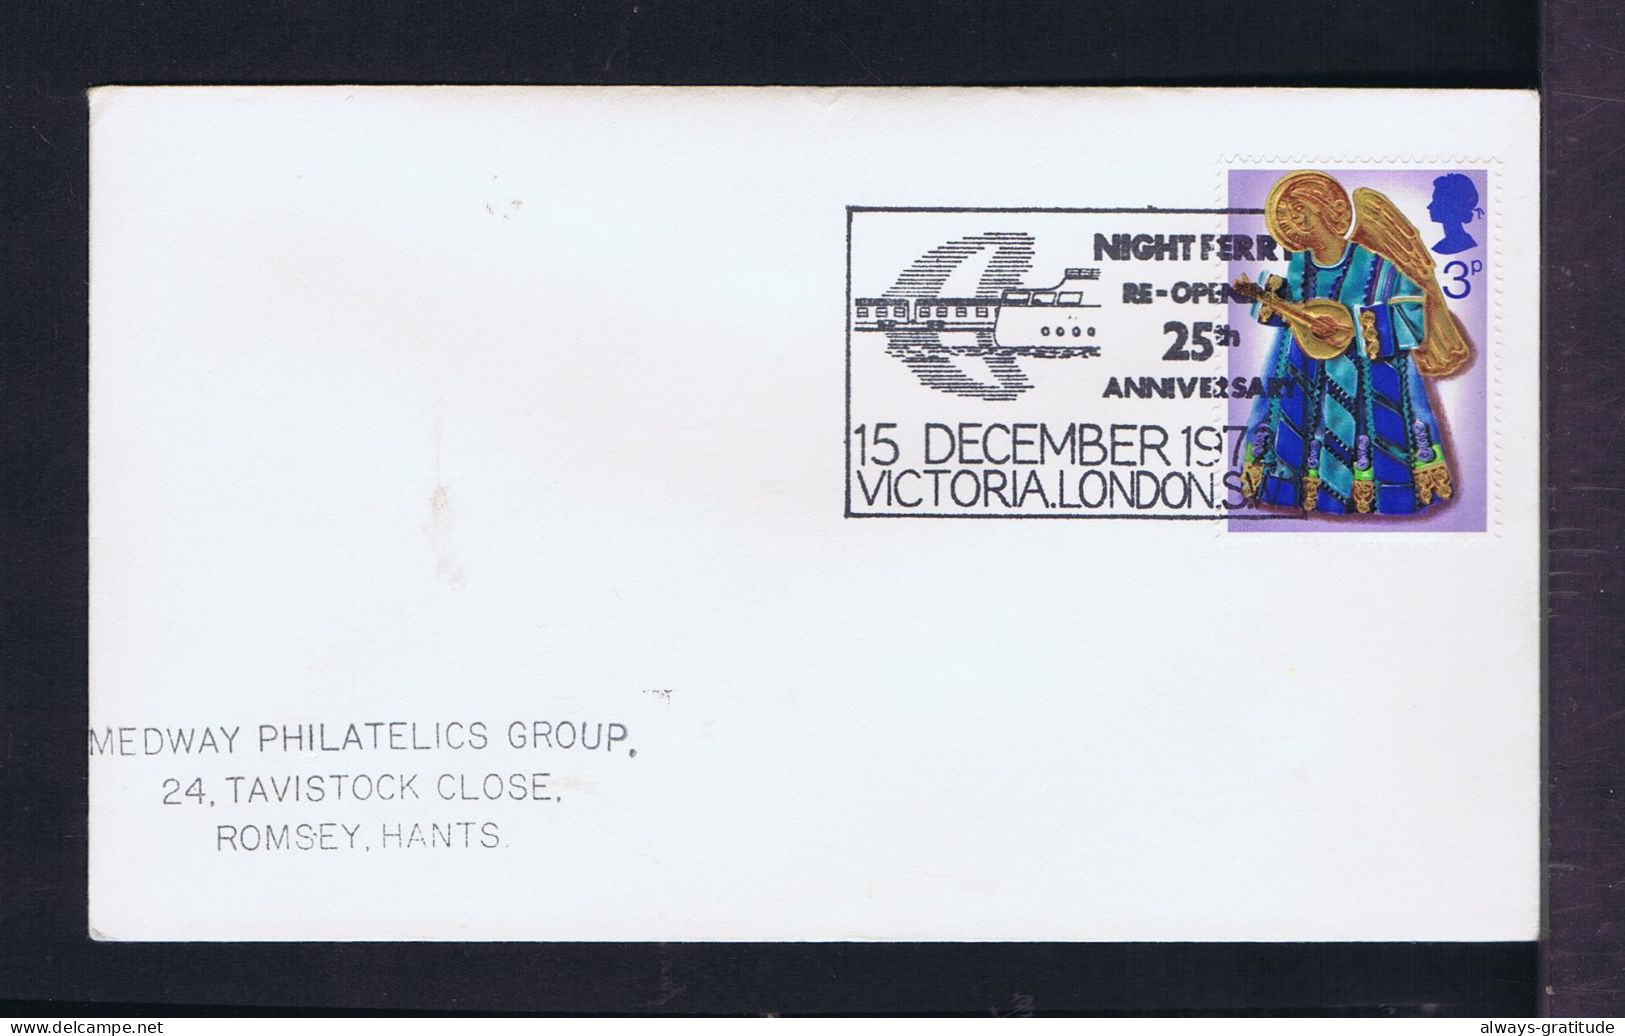 Sp10567 ENGLAND "NIGHT FERRY (re-open)" 25th Ann. Victoria -London 1972 Ships Railway Transports Mailed - Trains